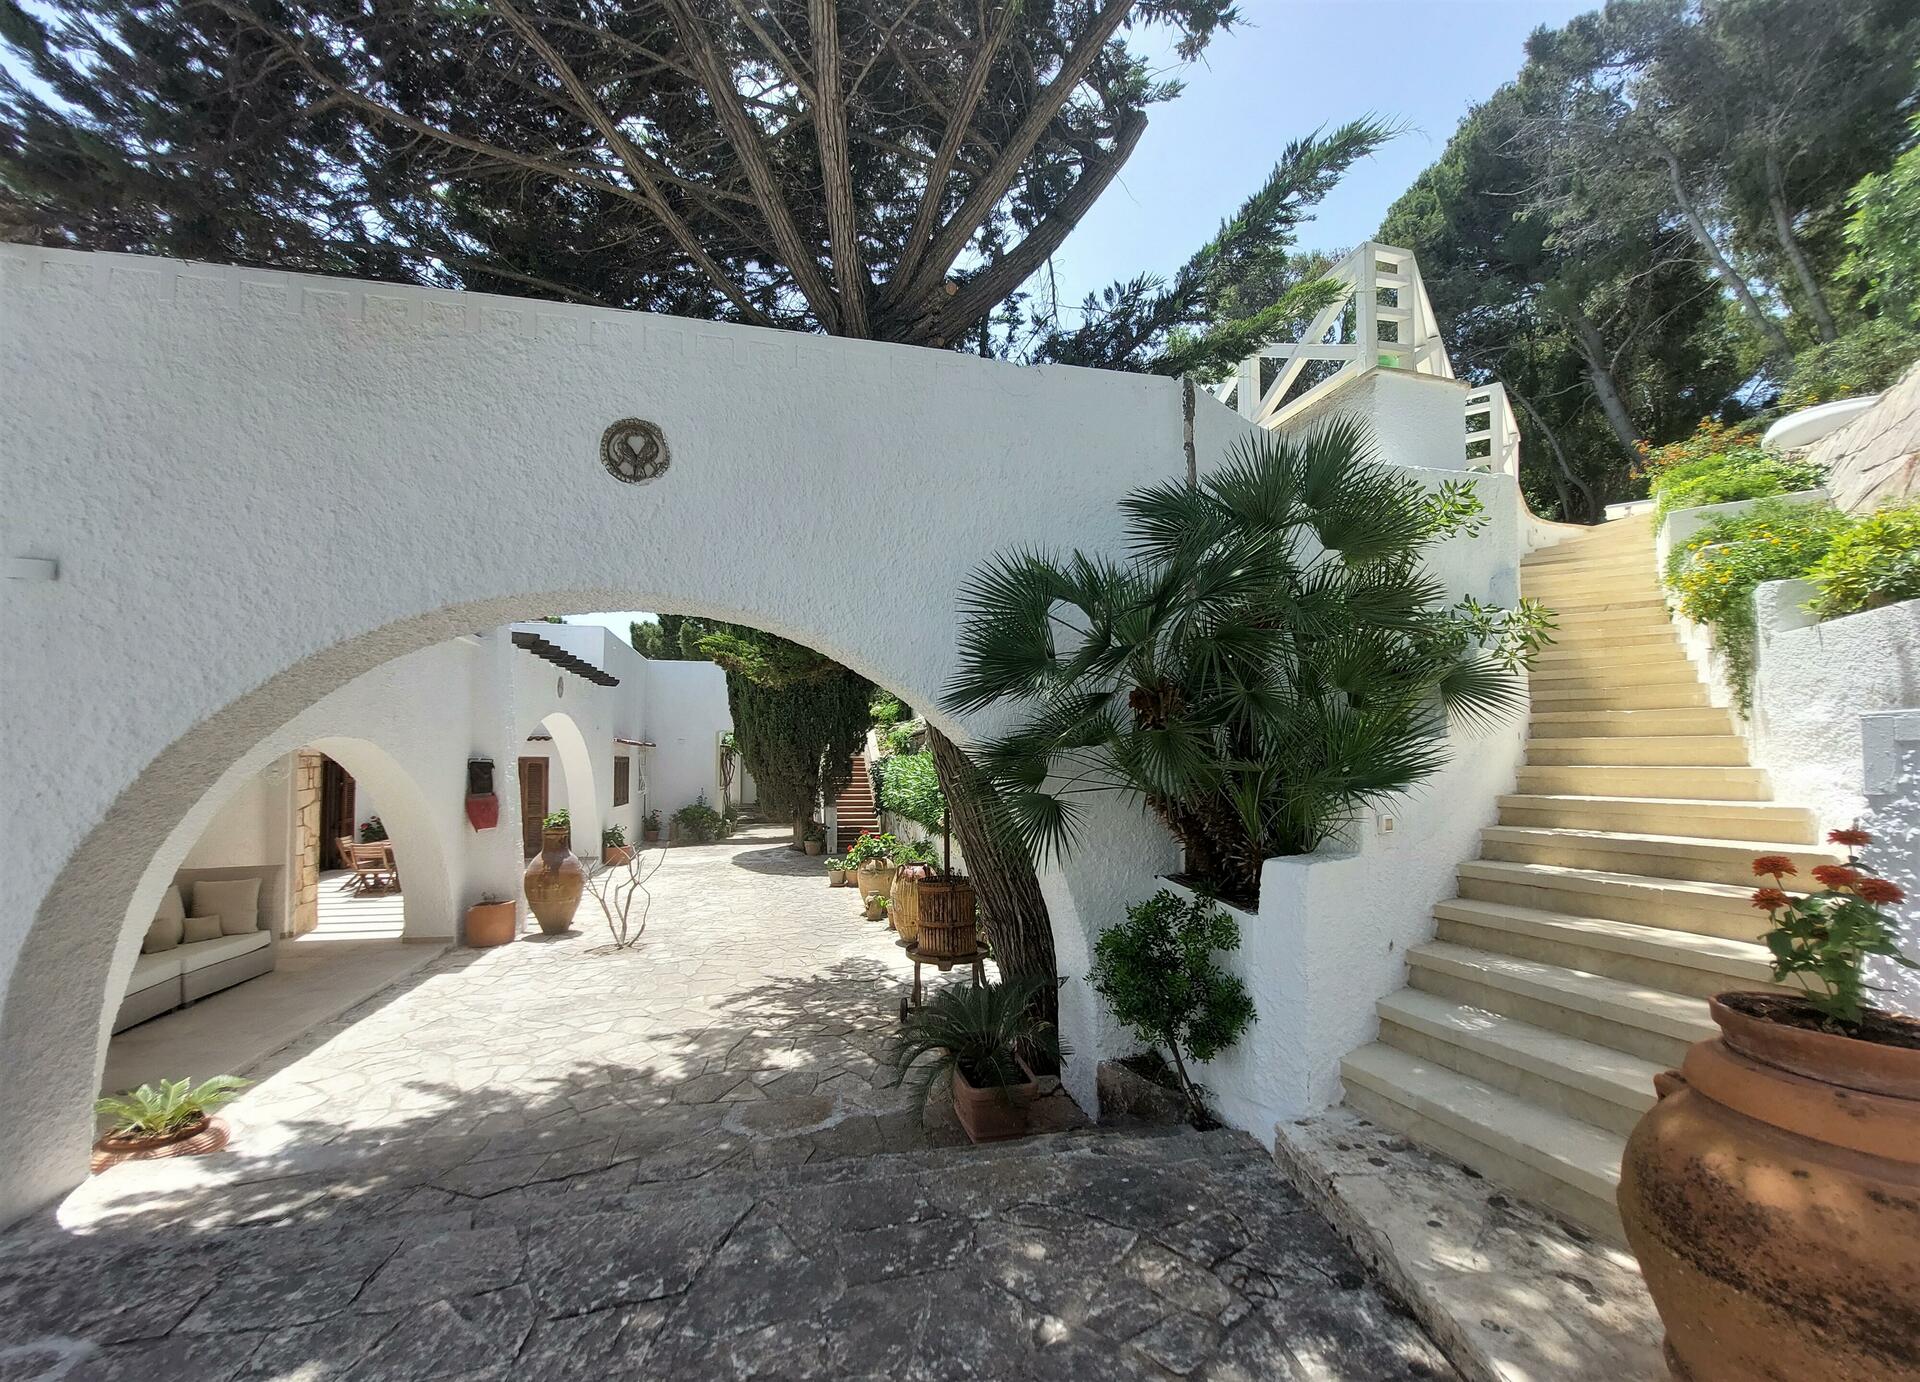 Side access to the villa